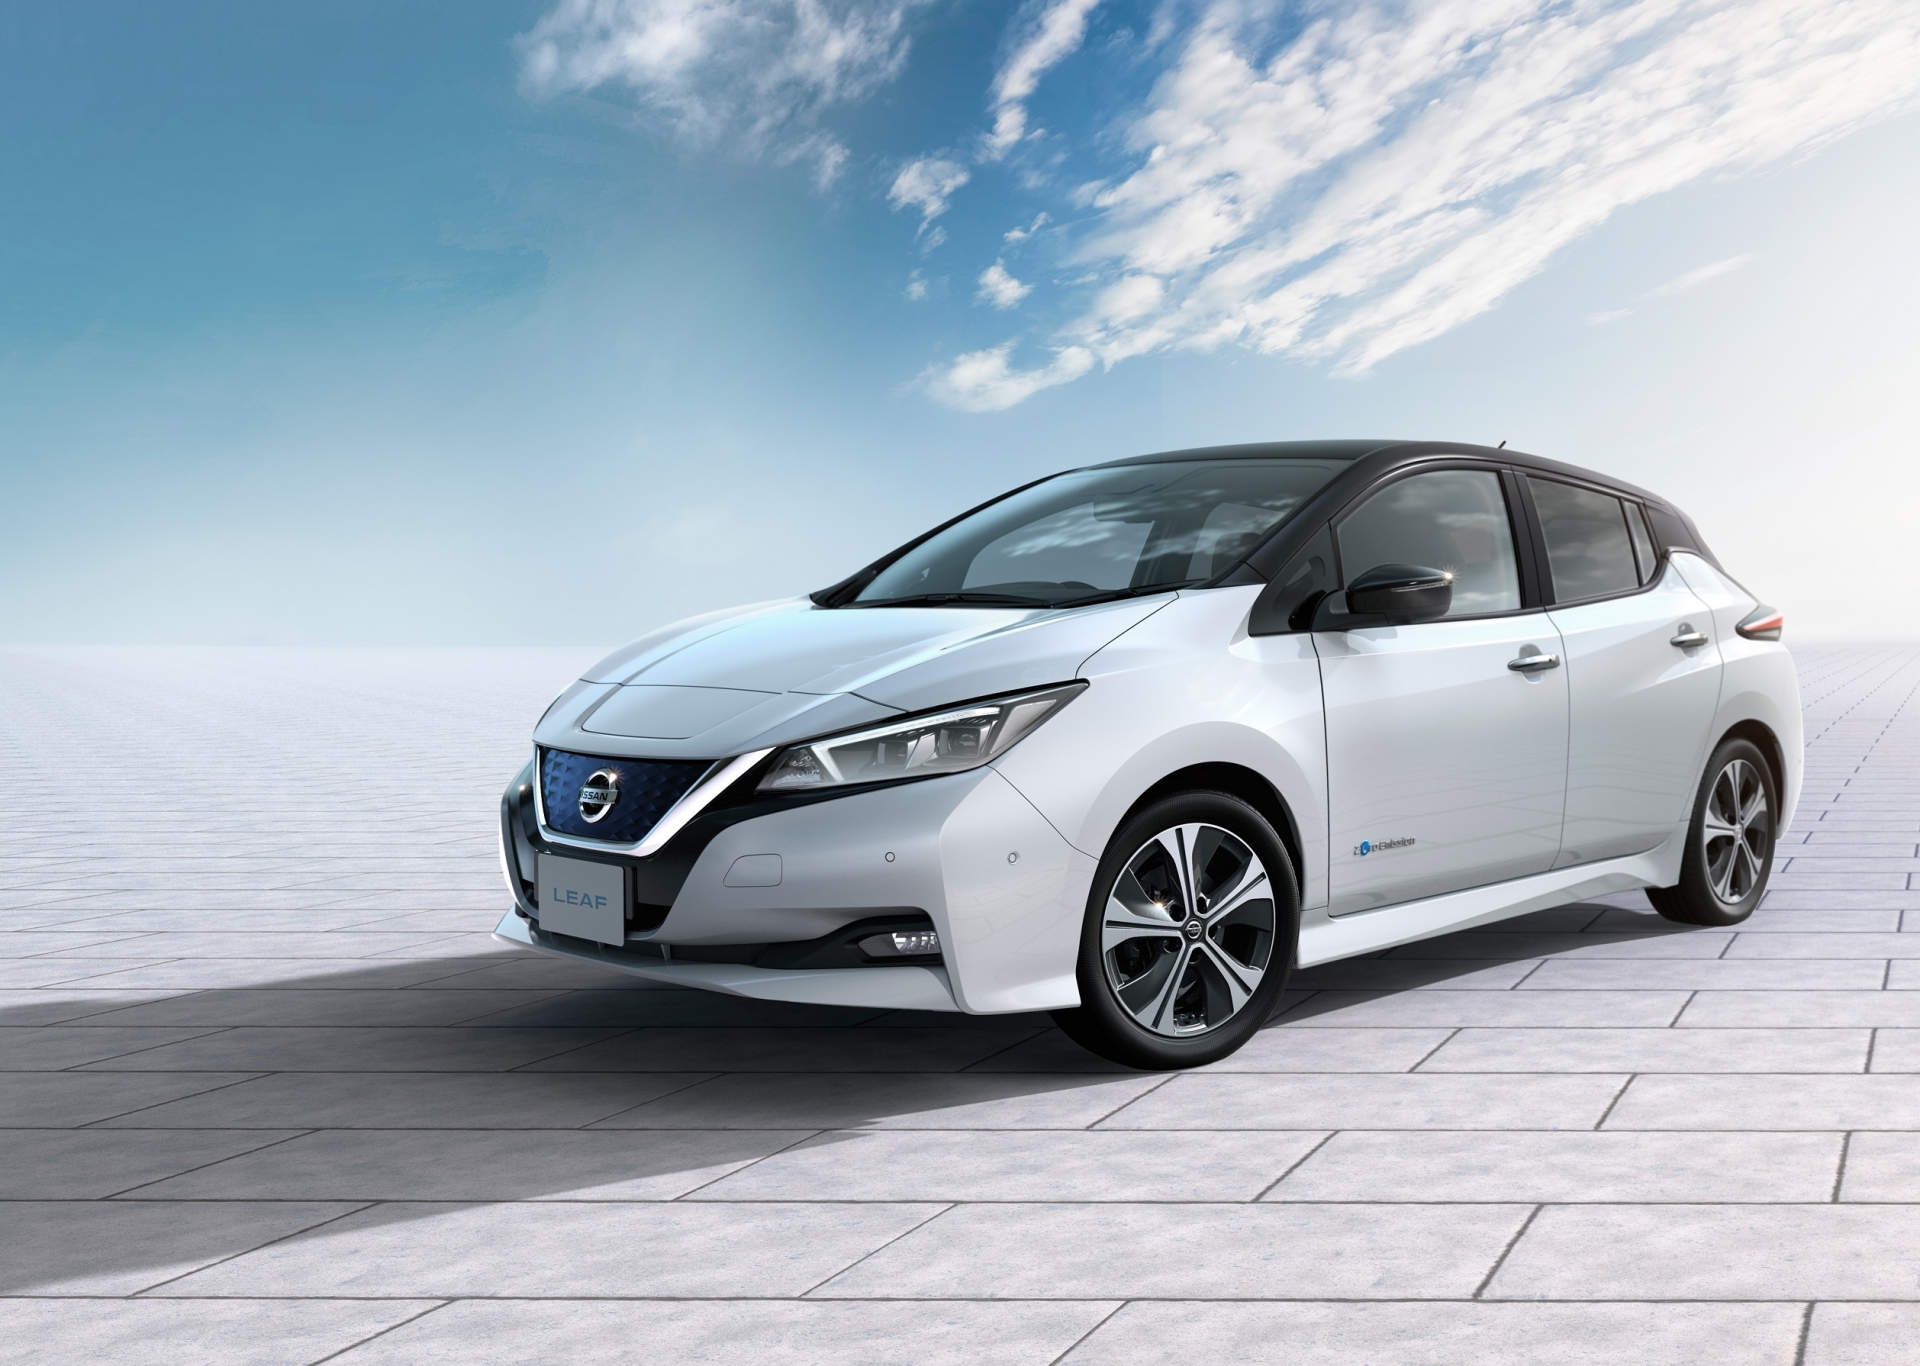 2018 Nissan LEAF - White Exterior - Front Side View